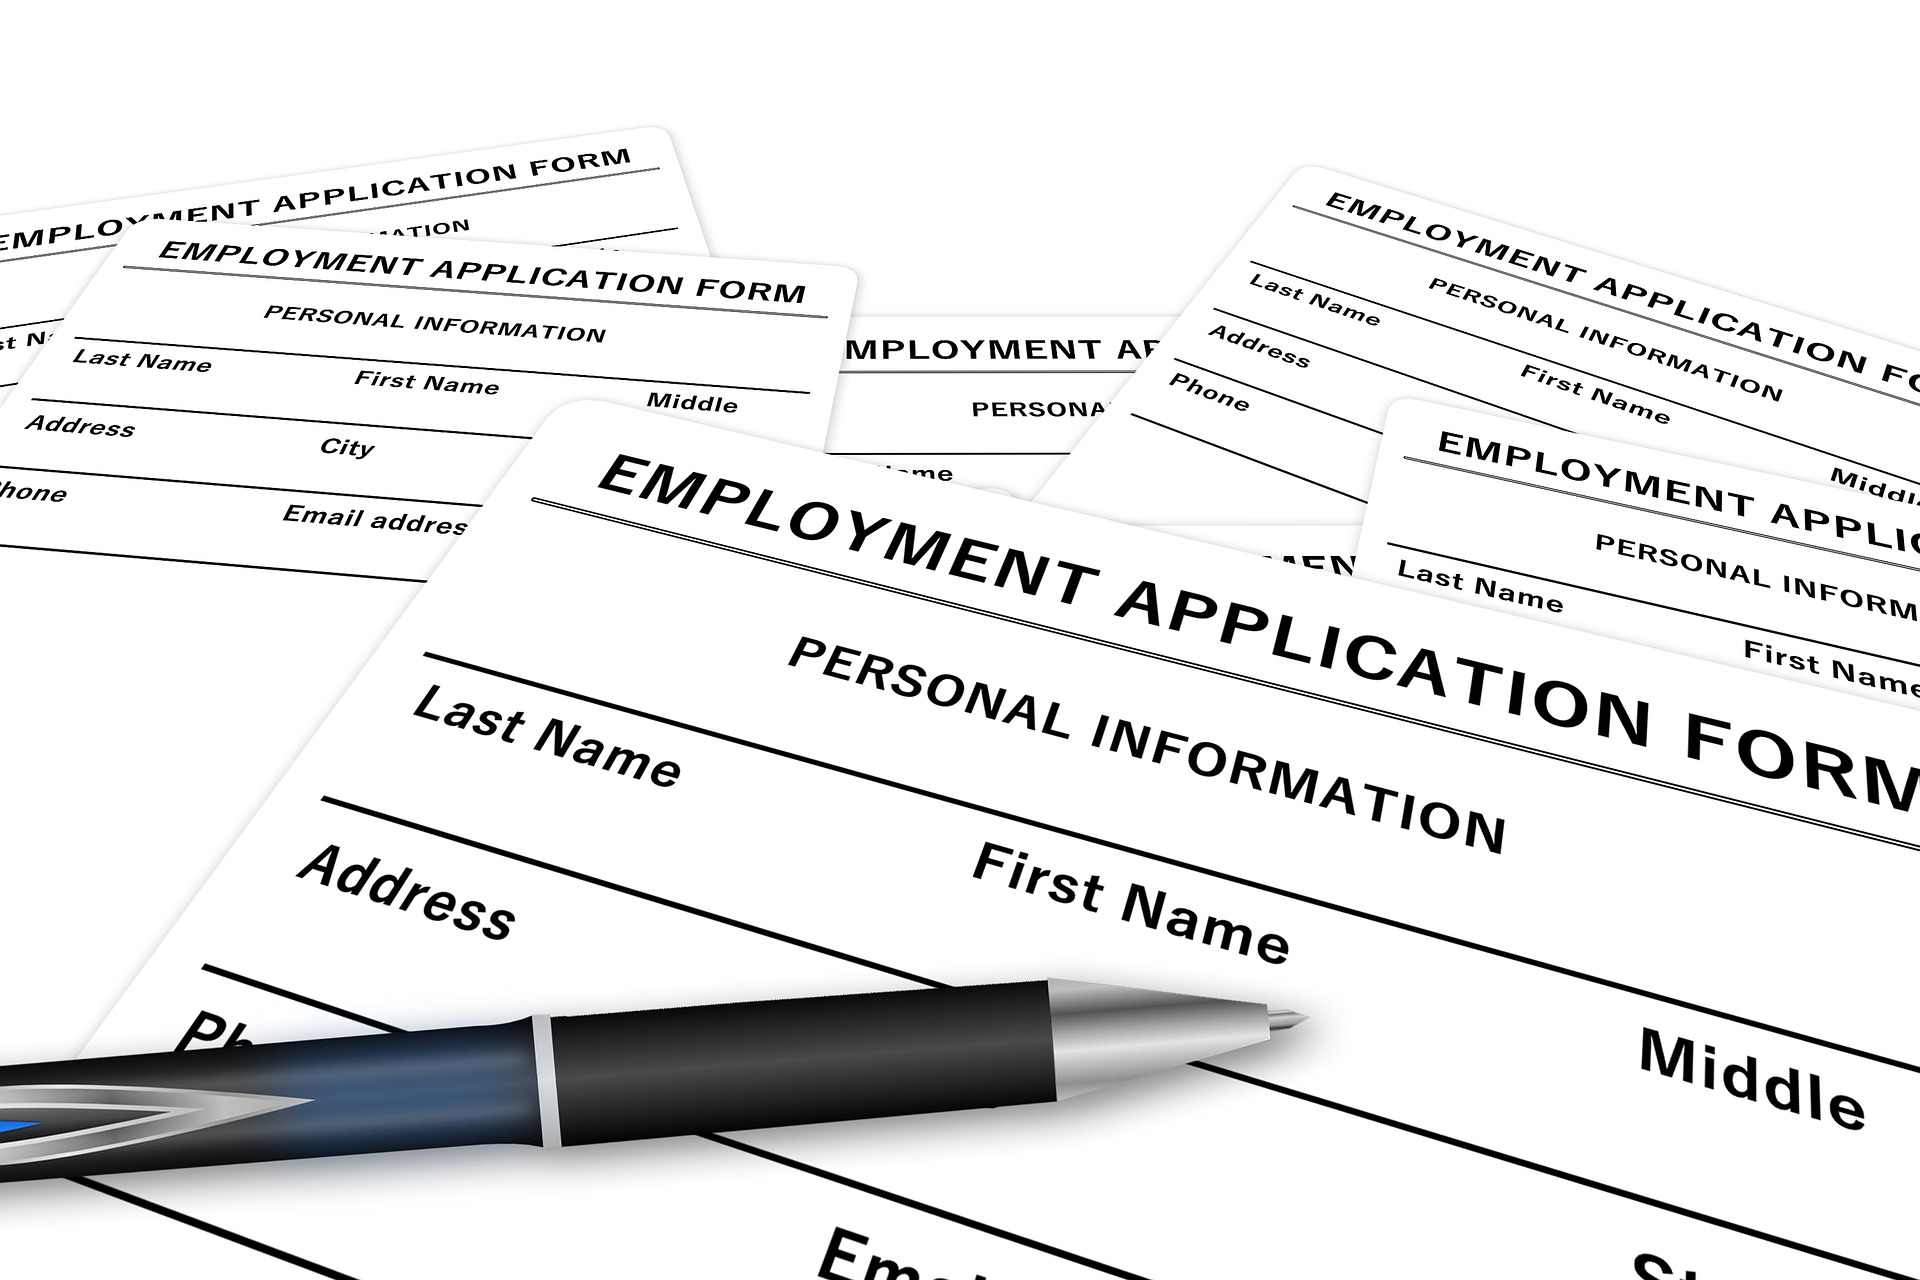 Multiple blank employment application forms, a pen, and SB20-207 information regarding Colorado's recovery and unemployment insurance.